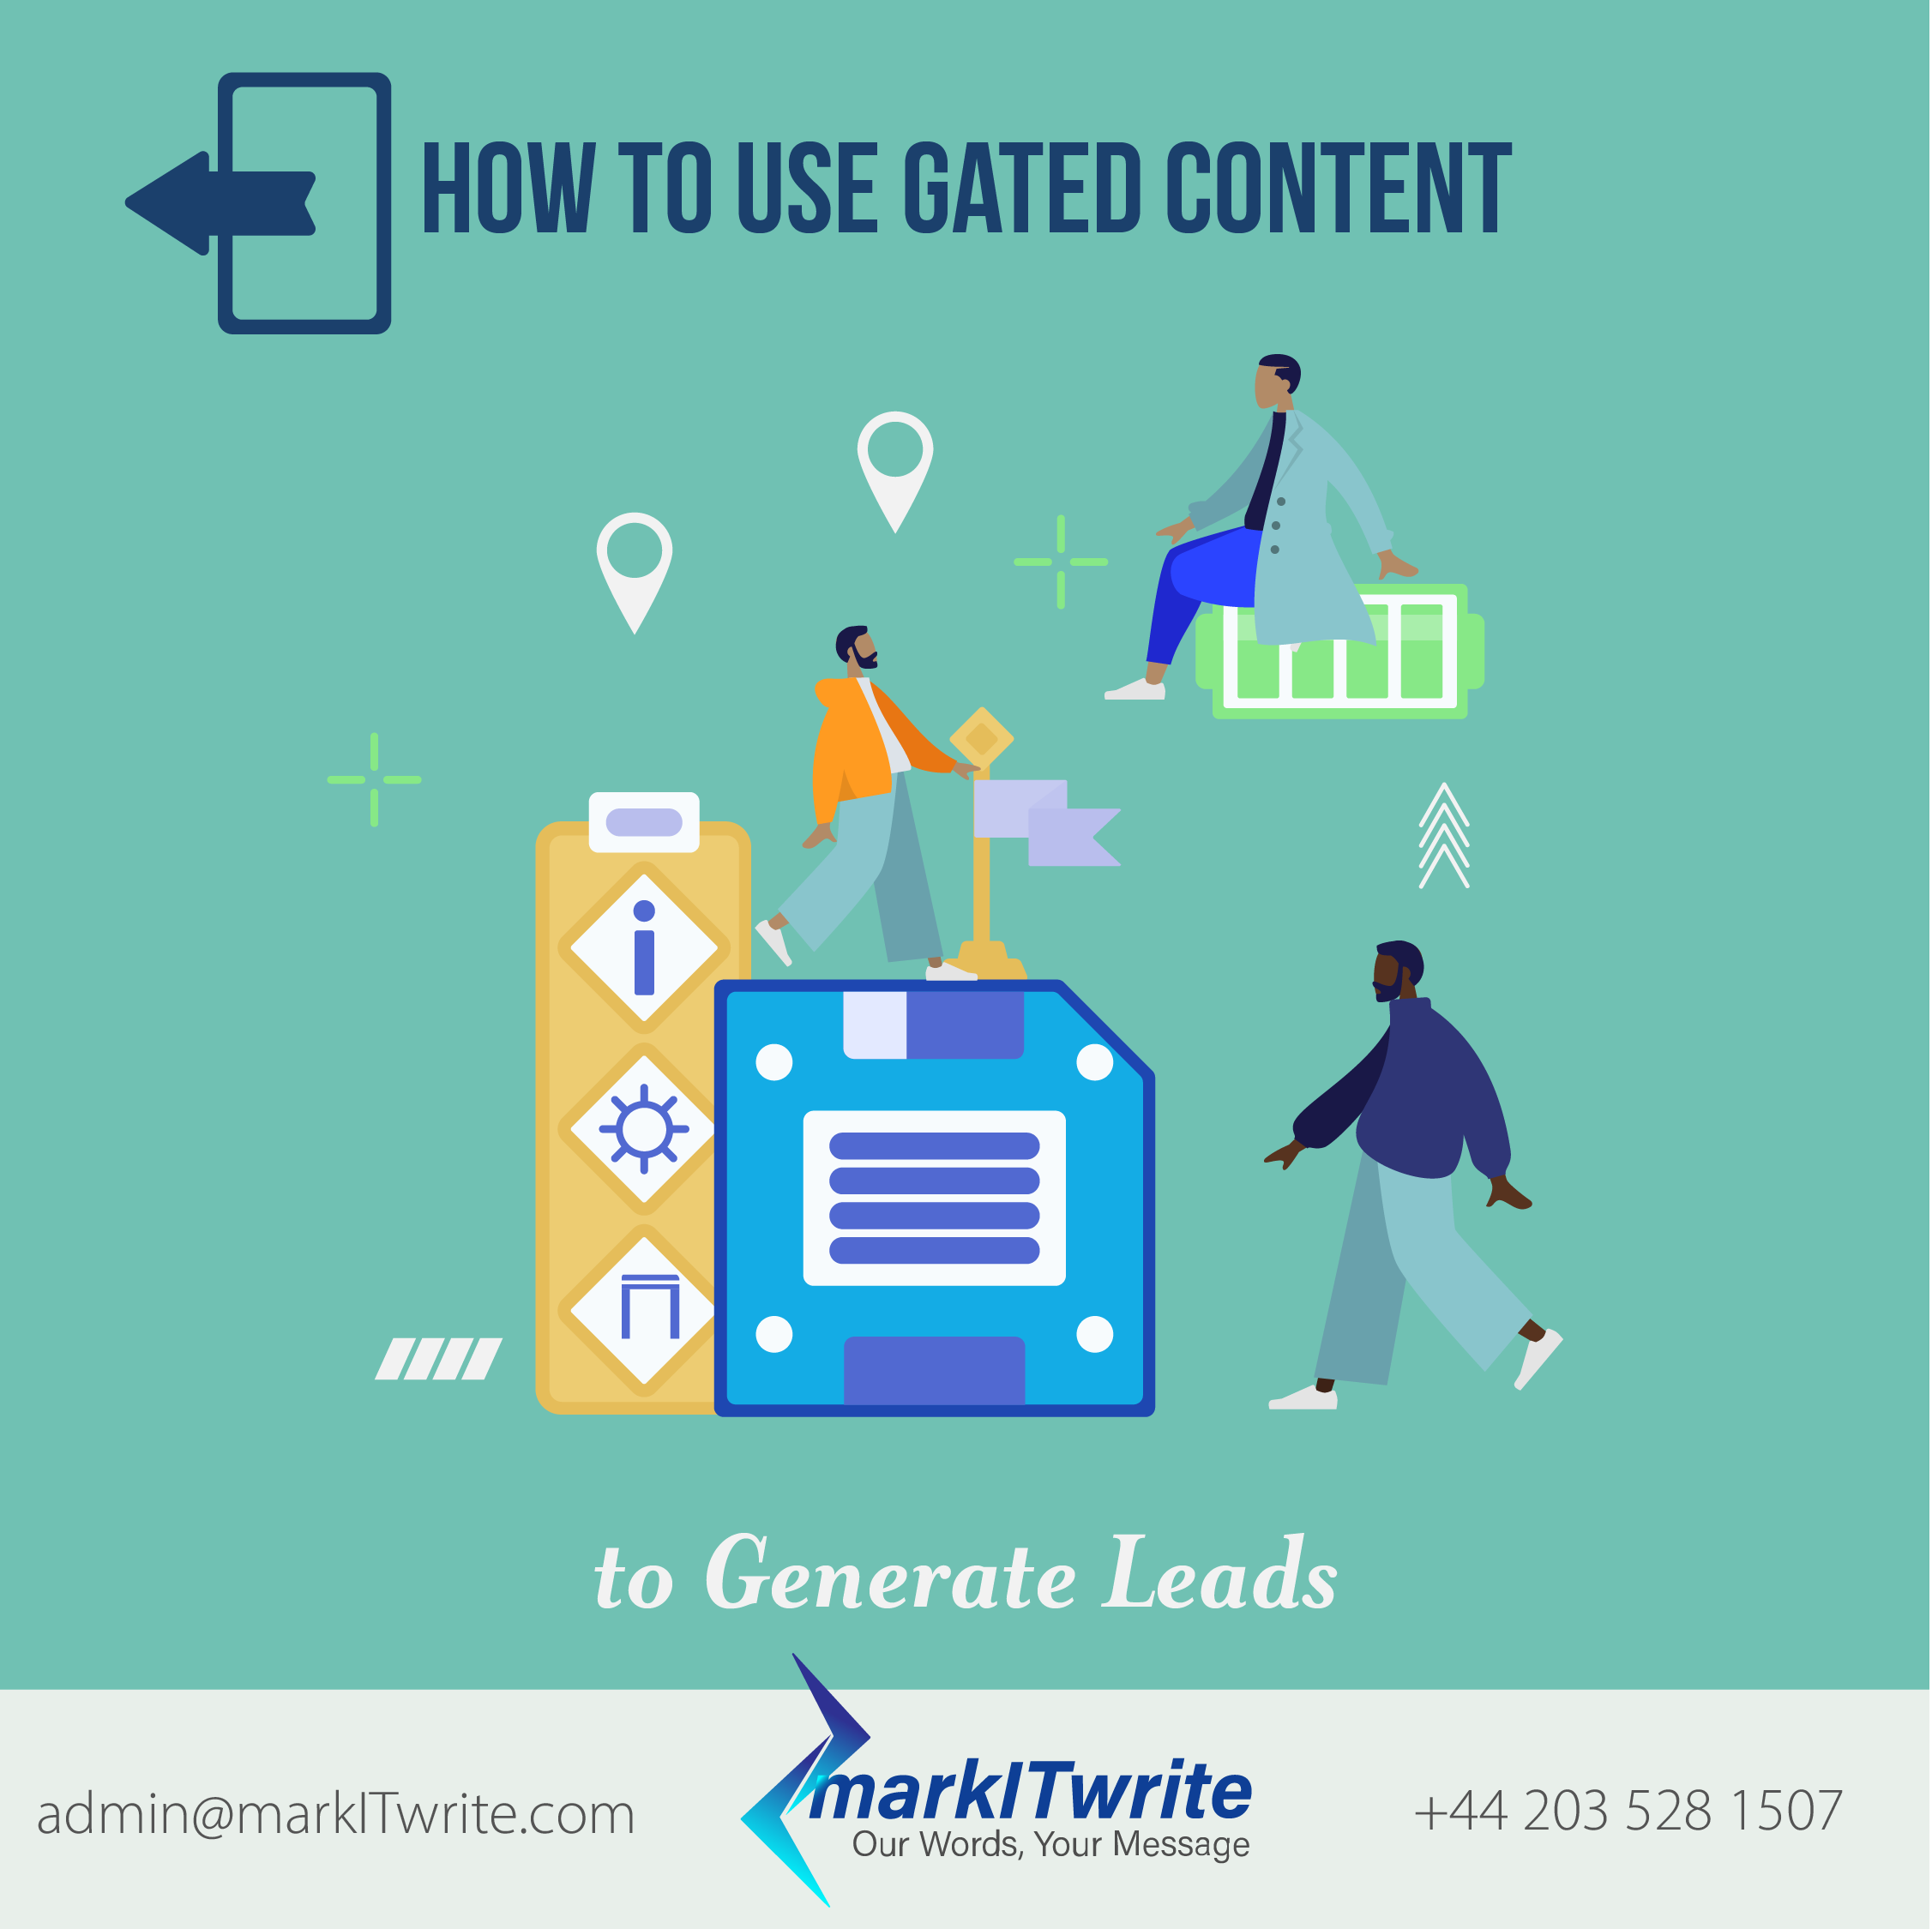 How to Use Gated Content to Generate Leads